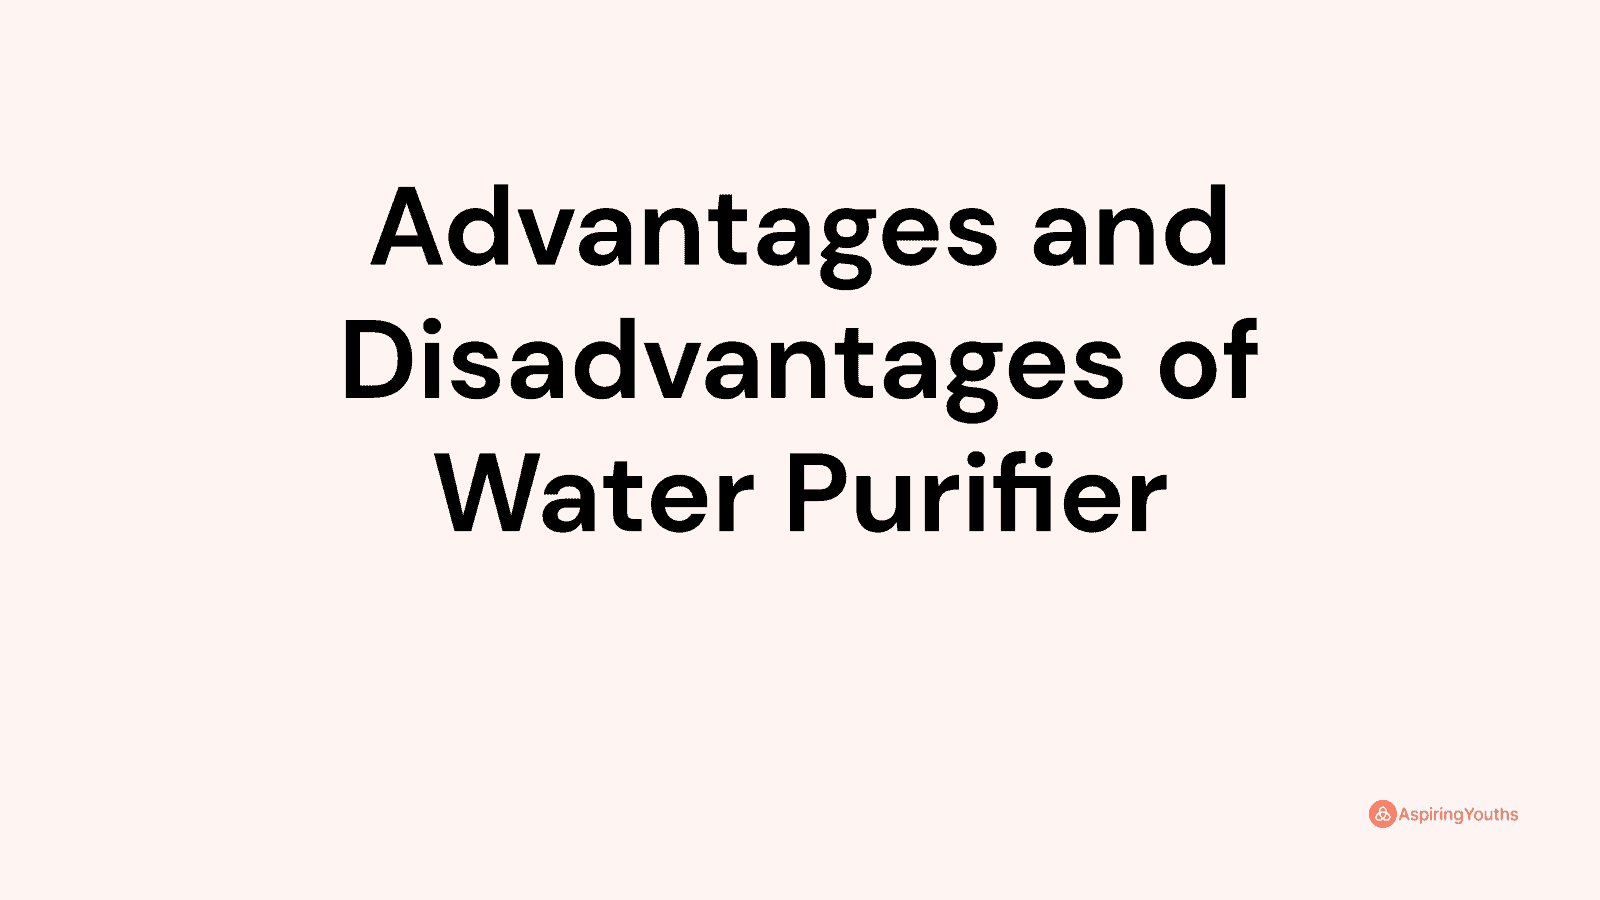 Advantages and disadvantages of Water Purifier